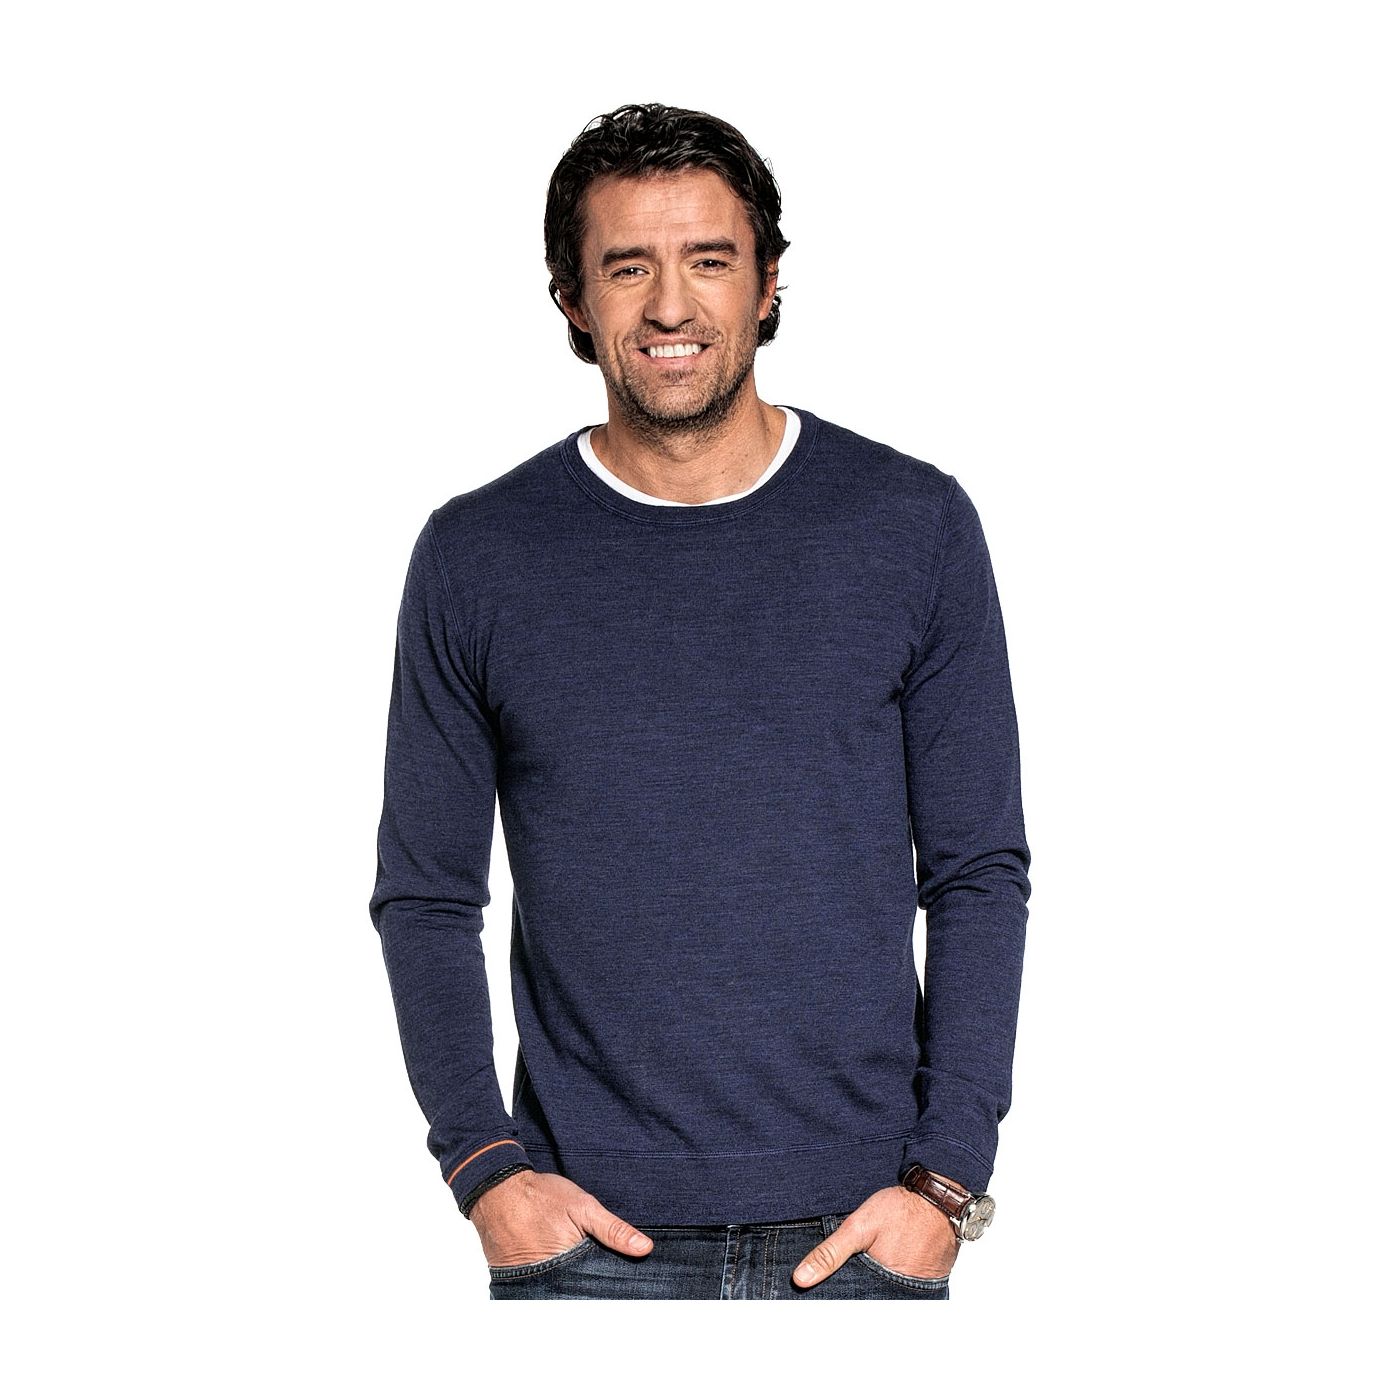 Crew neck pullover for men made of Merino wool in Blue